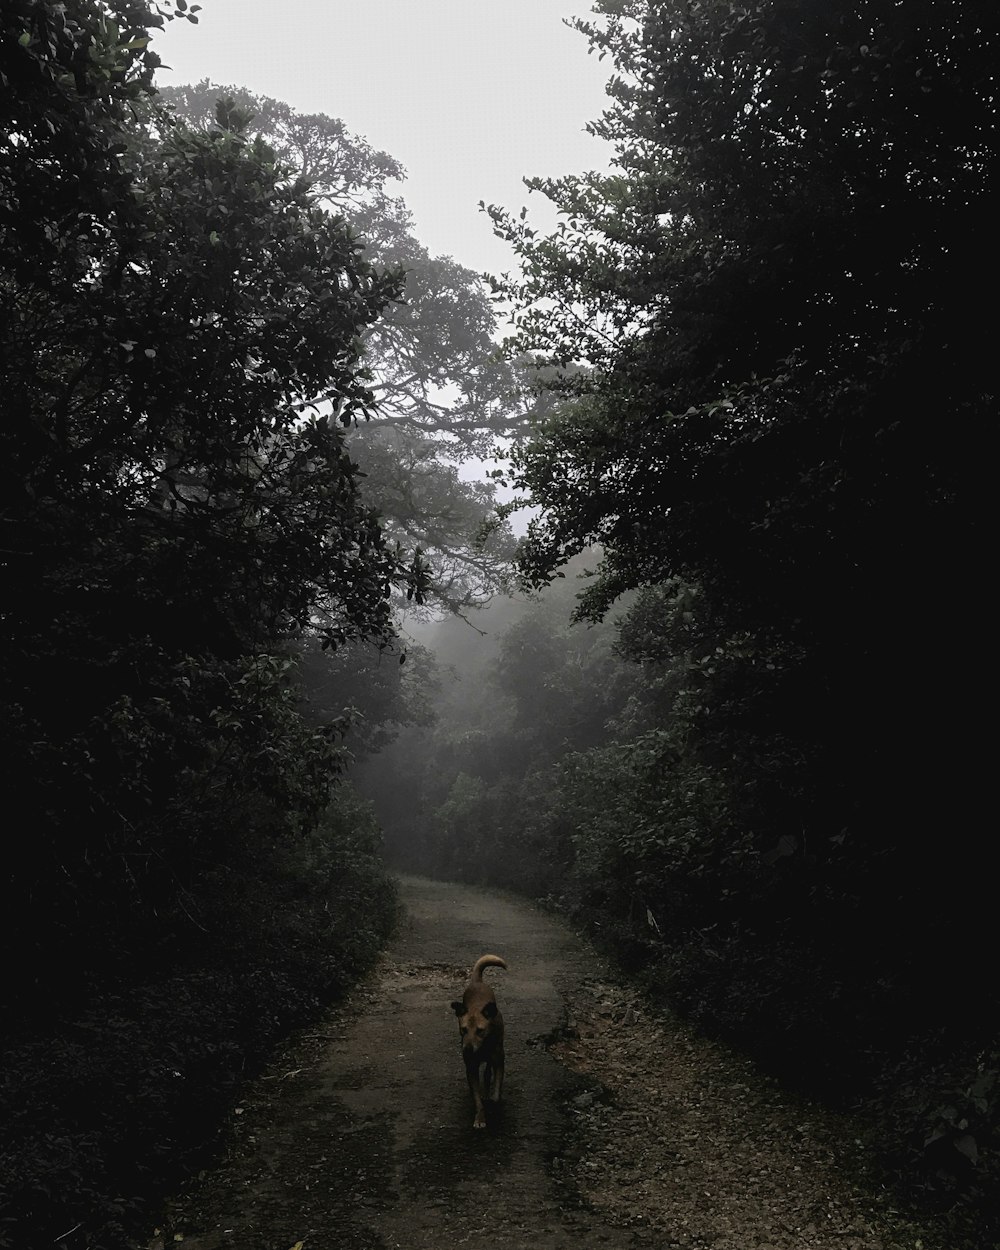 a dog that is walking down a dirt road